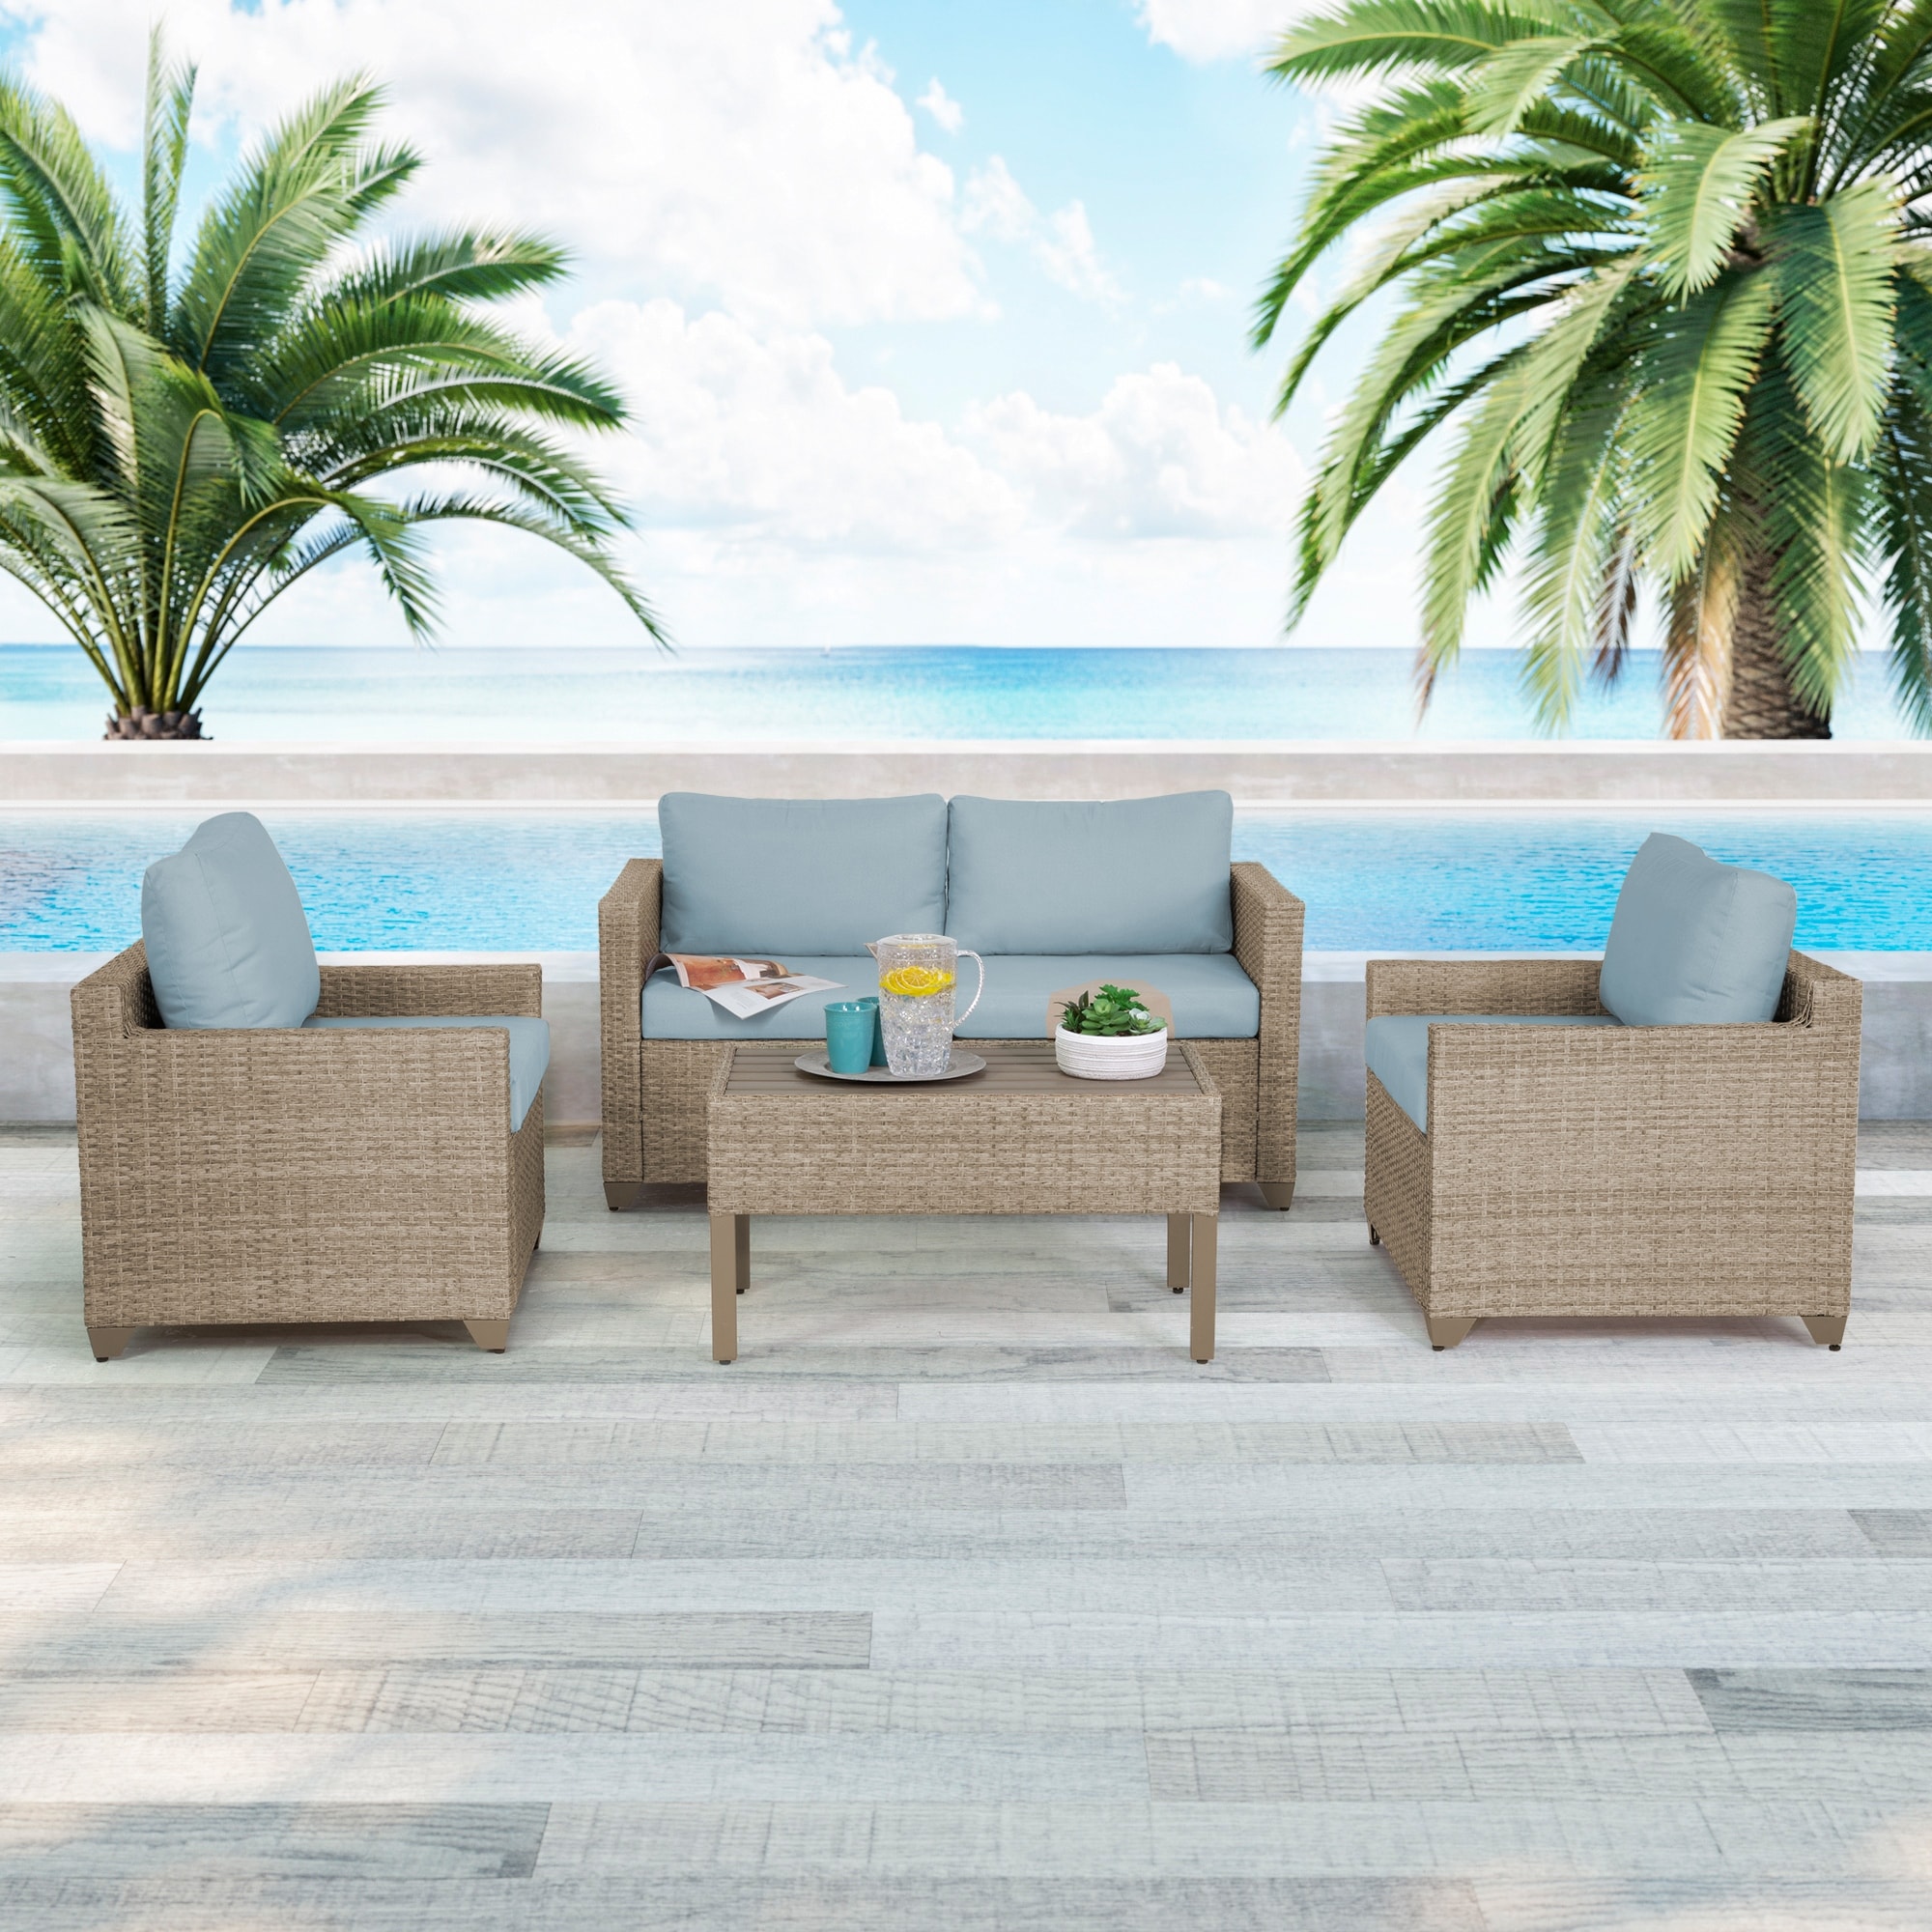 Maui 5-piece Outdoor Conversation Set Including Coffee Table And 2 Club Chairs In Natural Aged Wicker